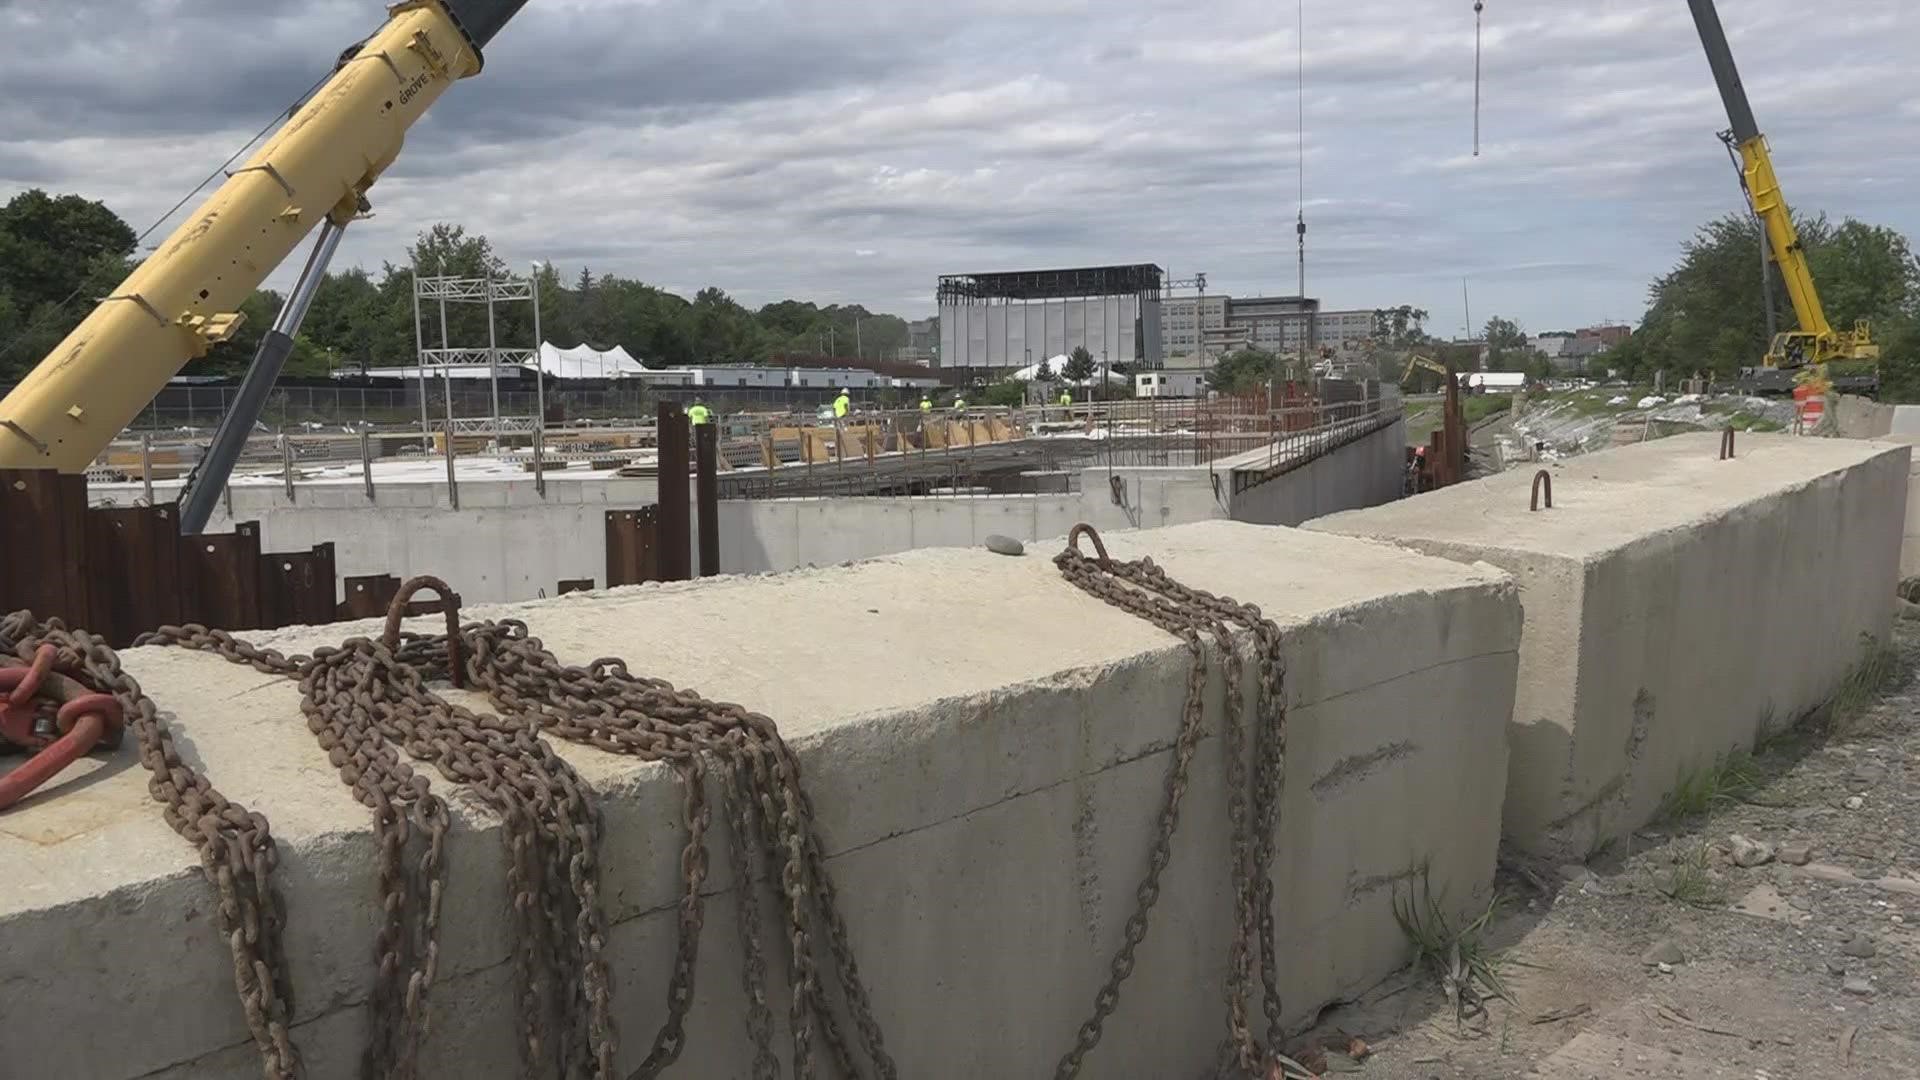 Once completed, the Davis Brook Combined Sewer Overflow Project will reduce contamination of the Penobscot River when heavy rains overwhelm the city's sewers.